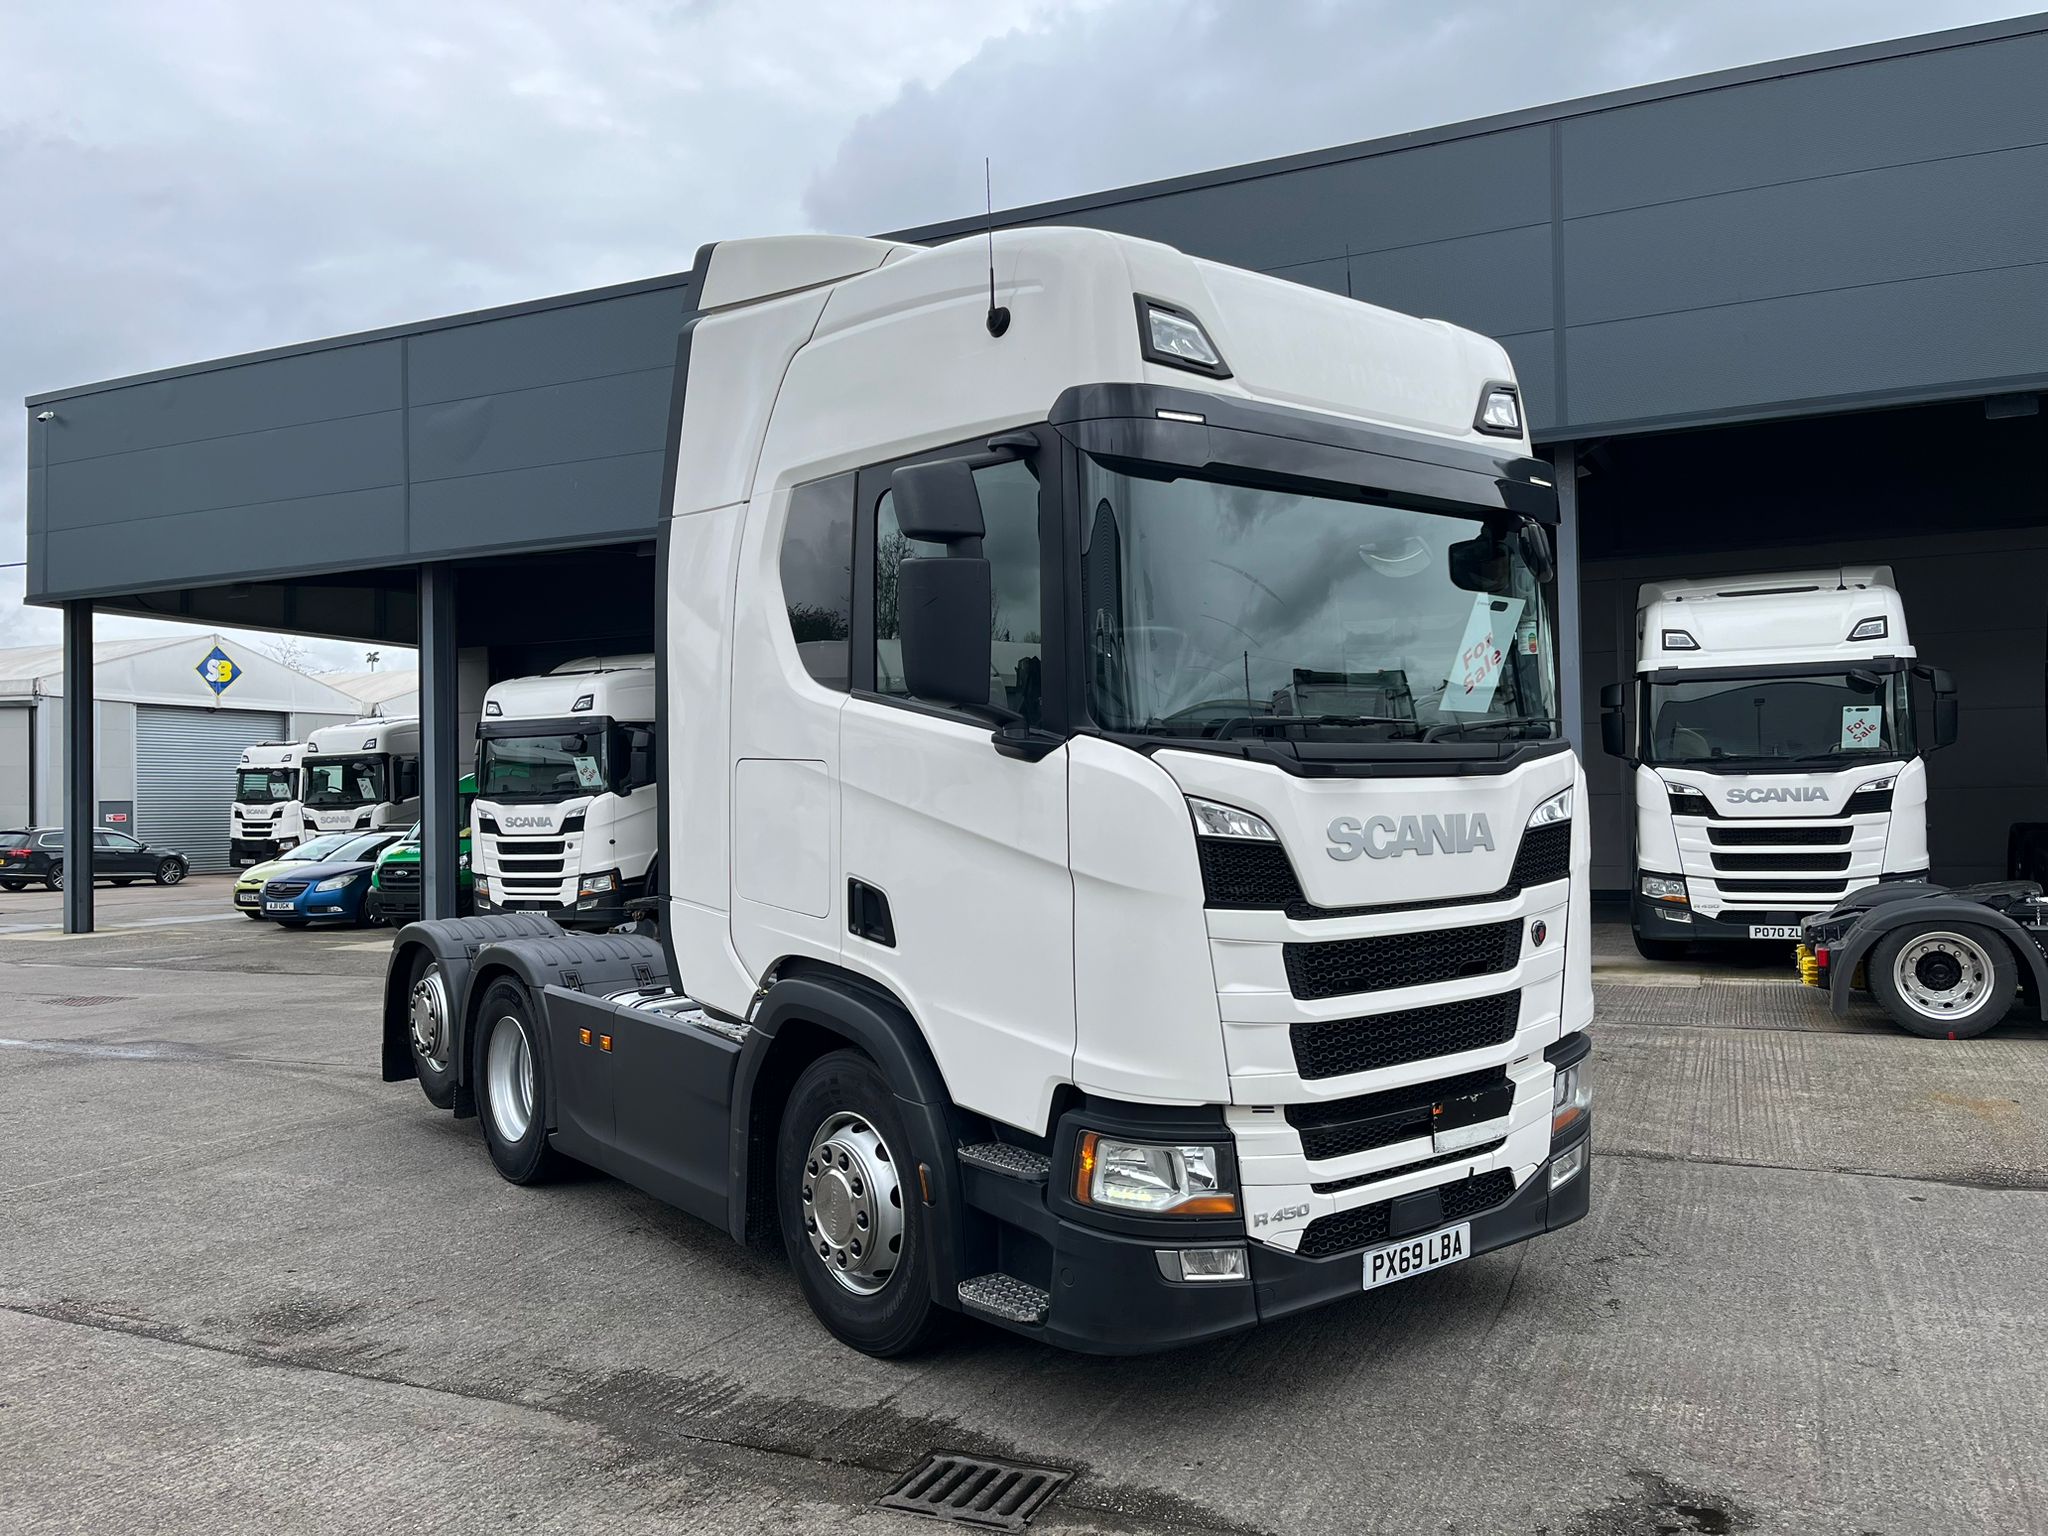 2019 69 Plate SCANIA R450 Highline Tag with Walking Floor – PX69LBA